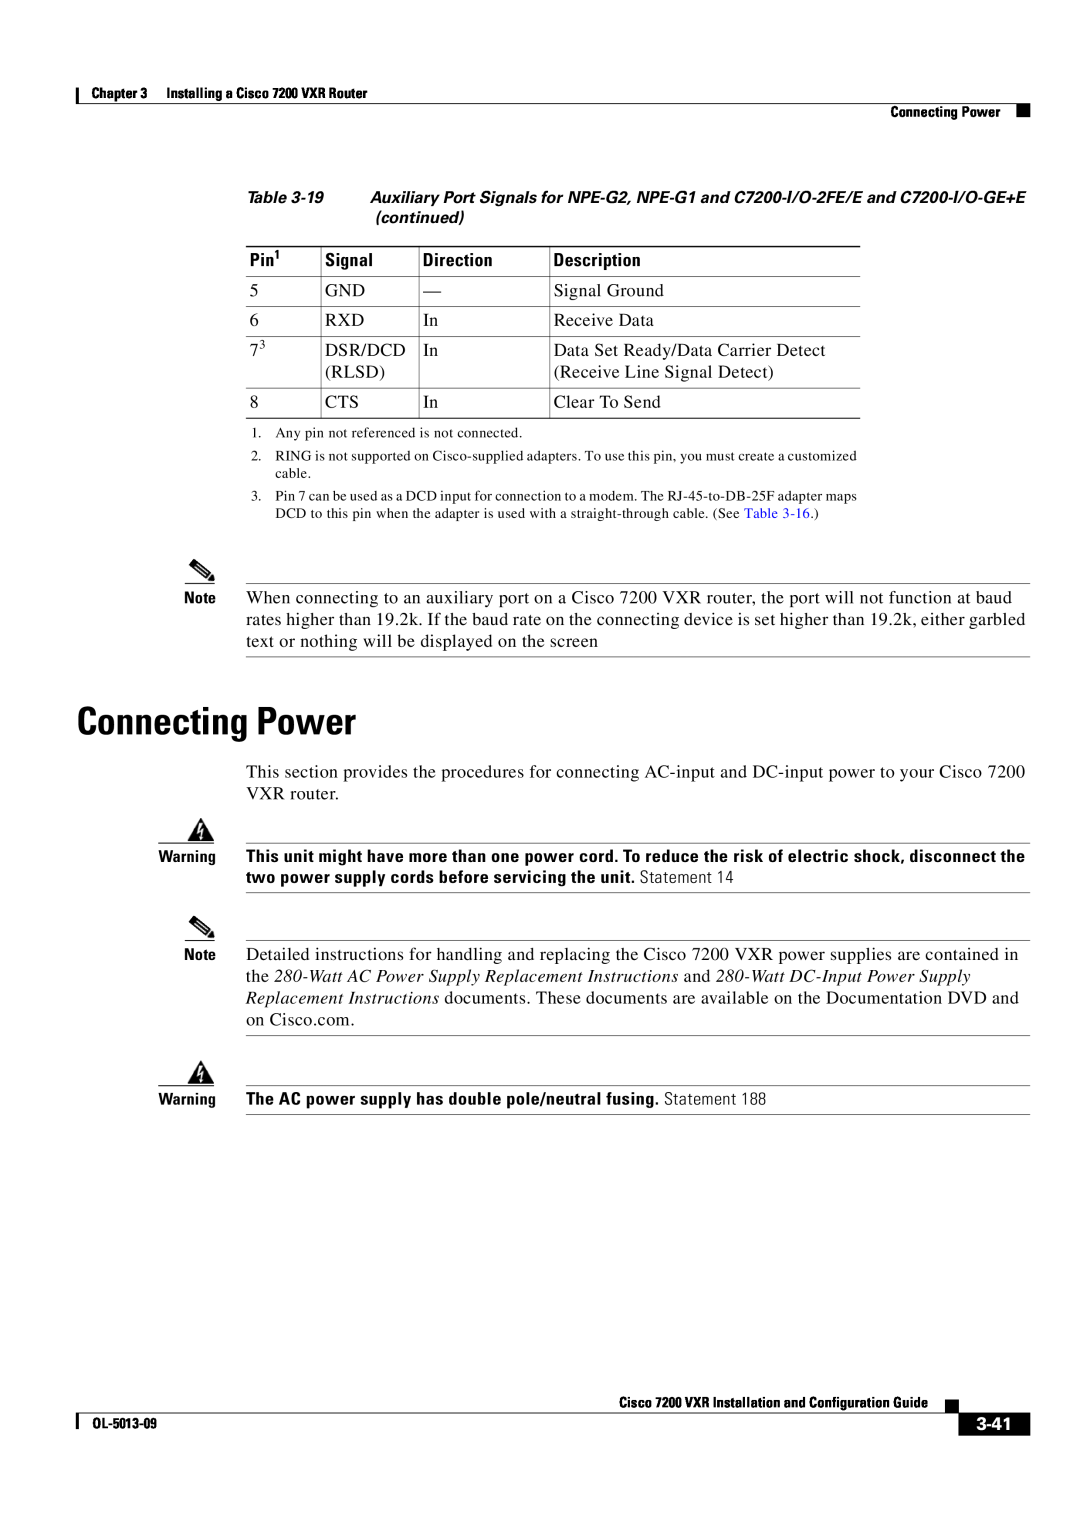 Cisco Systems 7200 VXR manual Connecting Power, 3-41, continued 